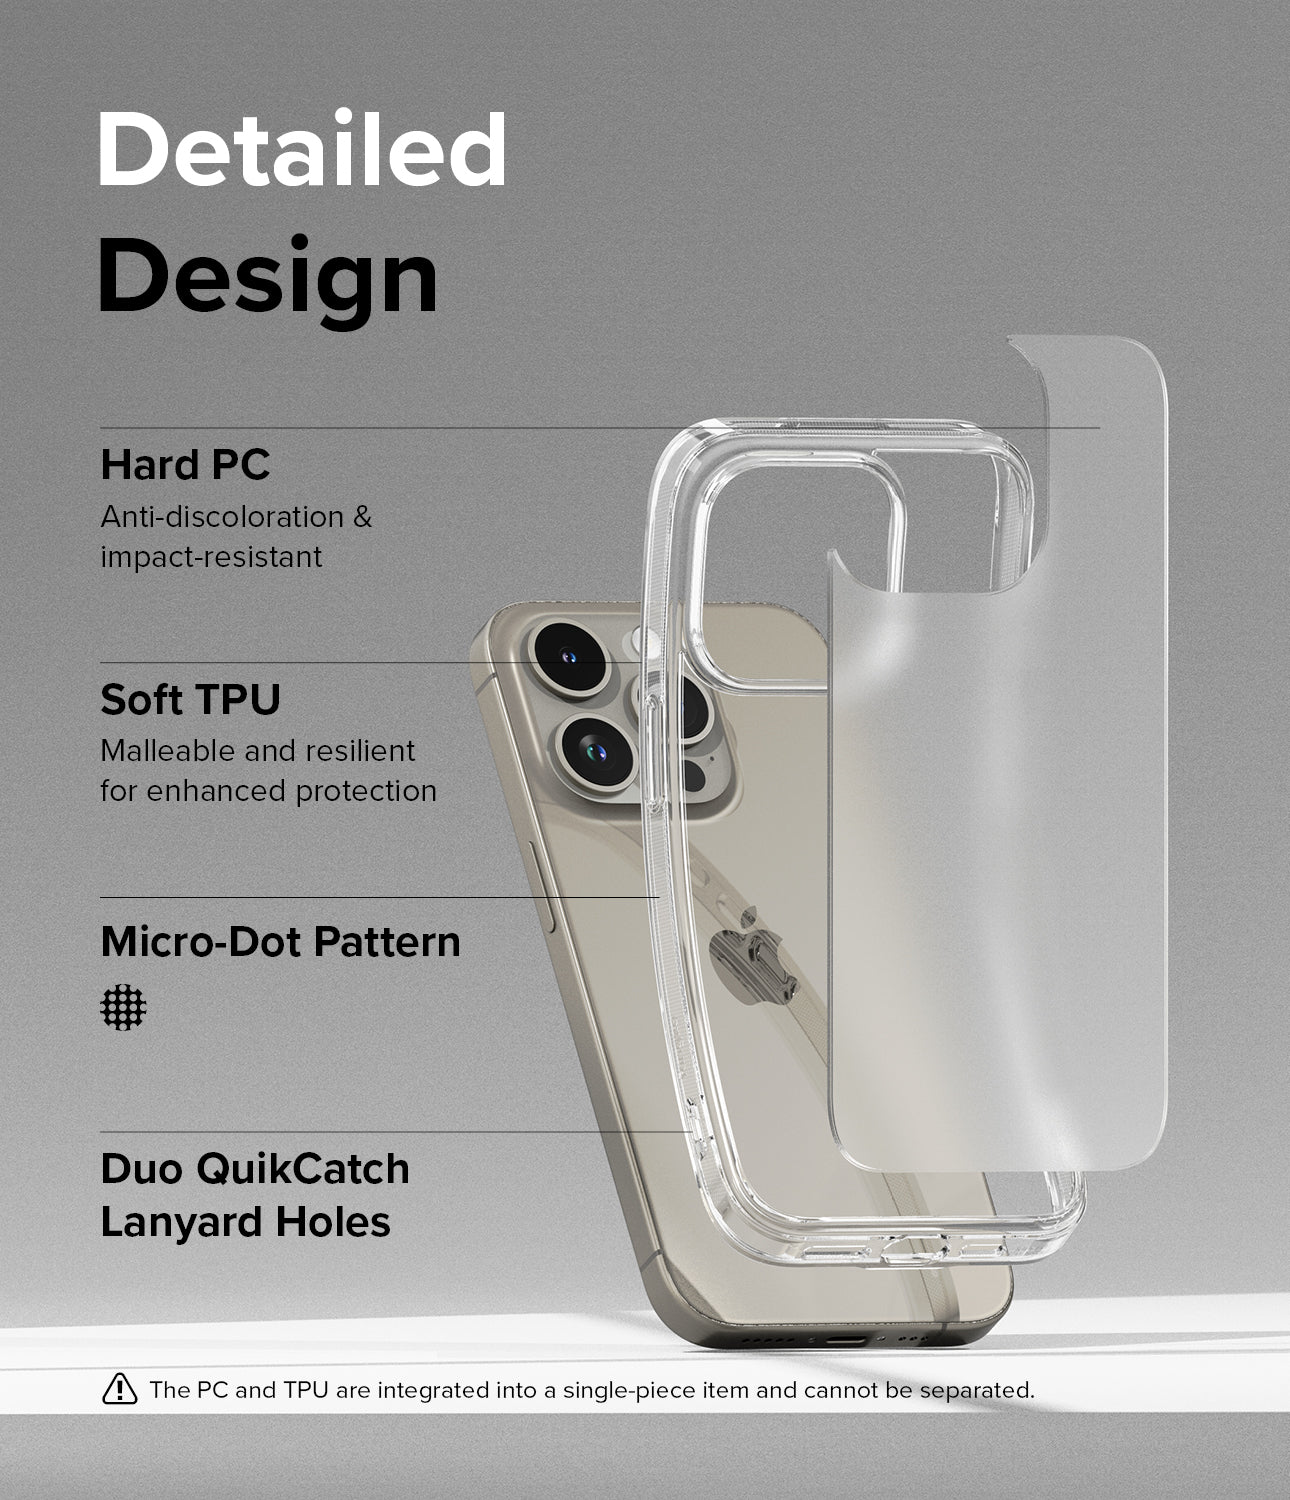 iPhone 15 Pro Case | Fusion - Matte Clear - Detailed Design. Anti-discoloration and impact-resistant with Hard PC. Malleable and resilient for enhanced protection with Soft TPU. Micro-Dot Pattern. Duo QuikCatch Lanyard Holes.